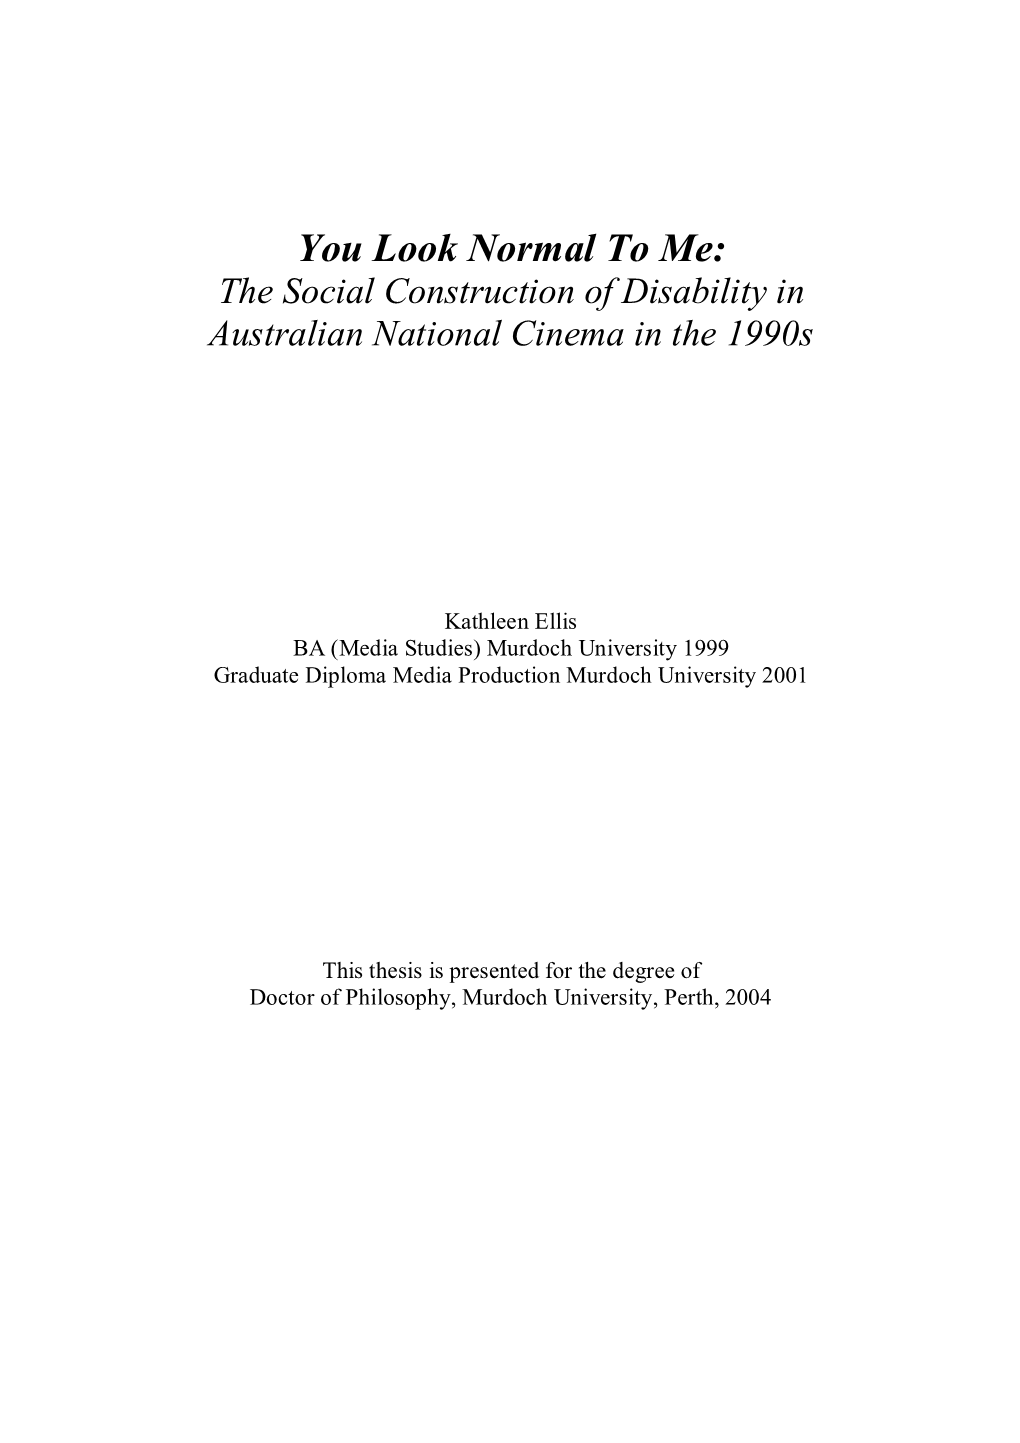 You Look Normal to Me: the Social Construction of Disability in Australian National Cinema in the 1990S